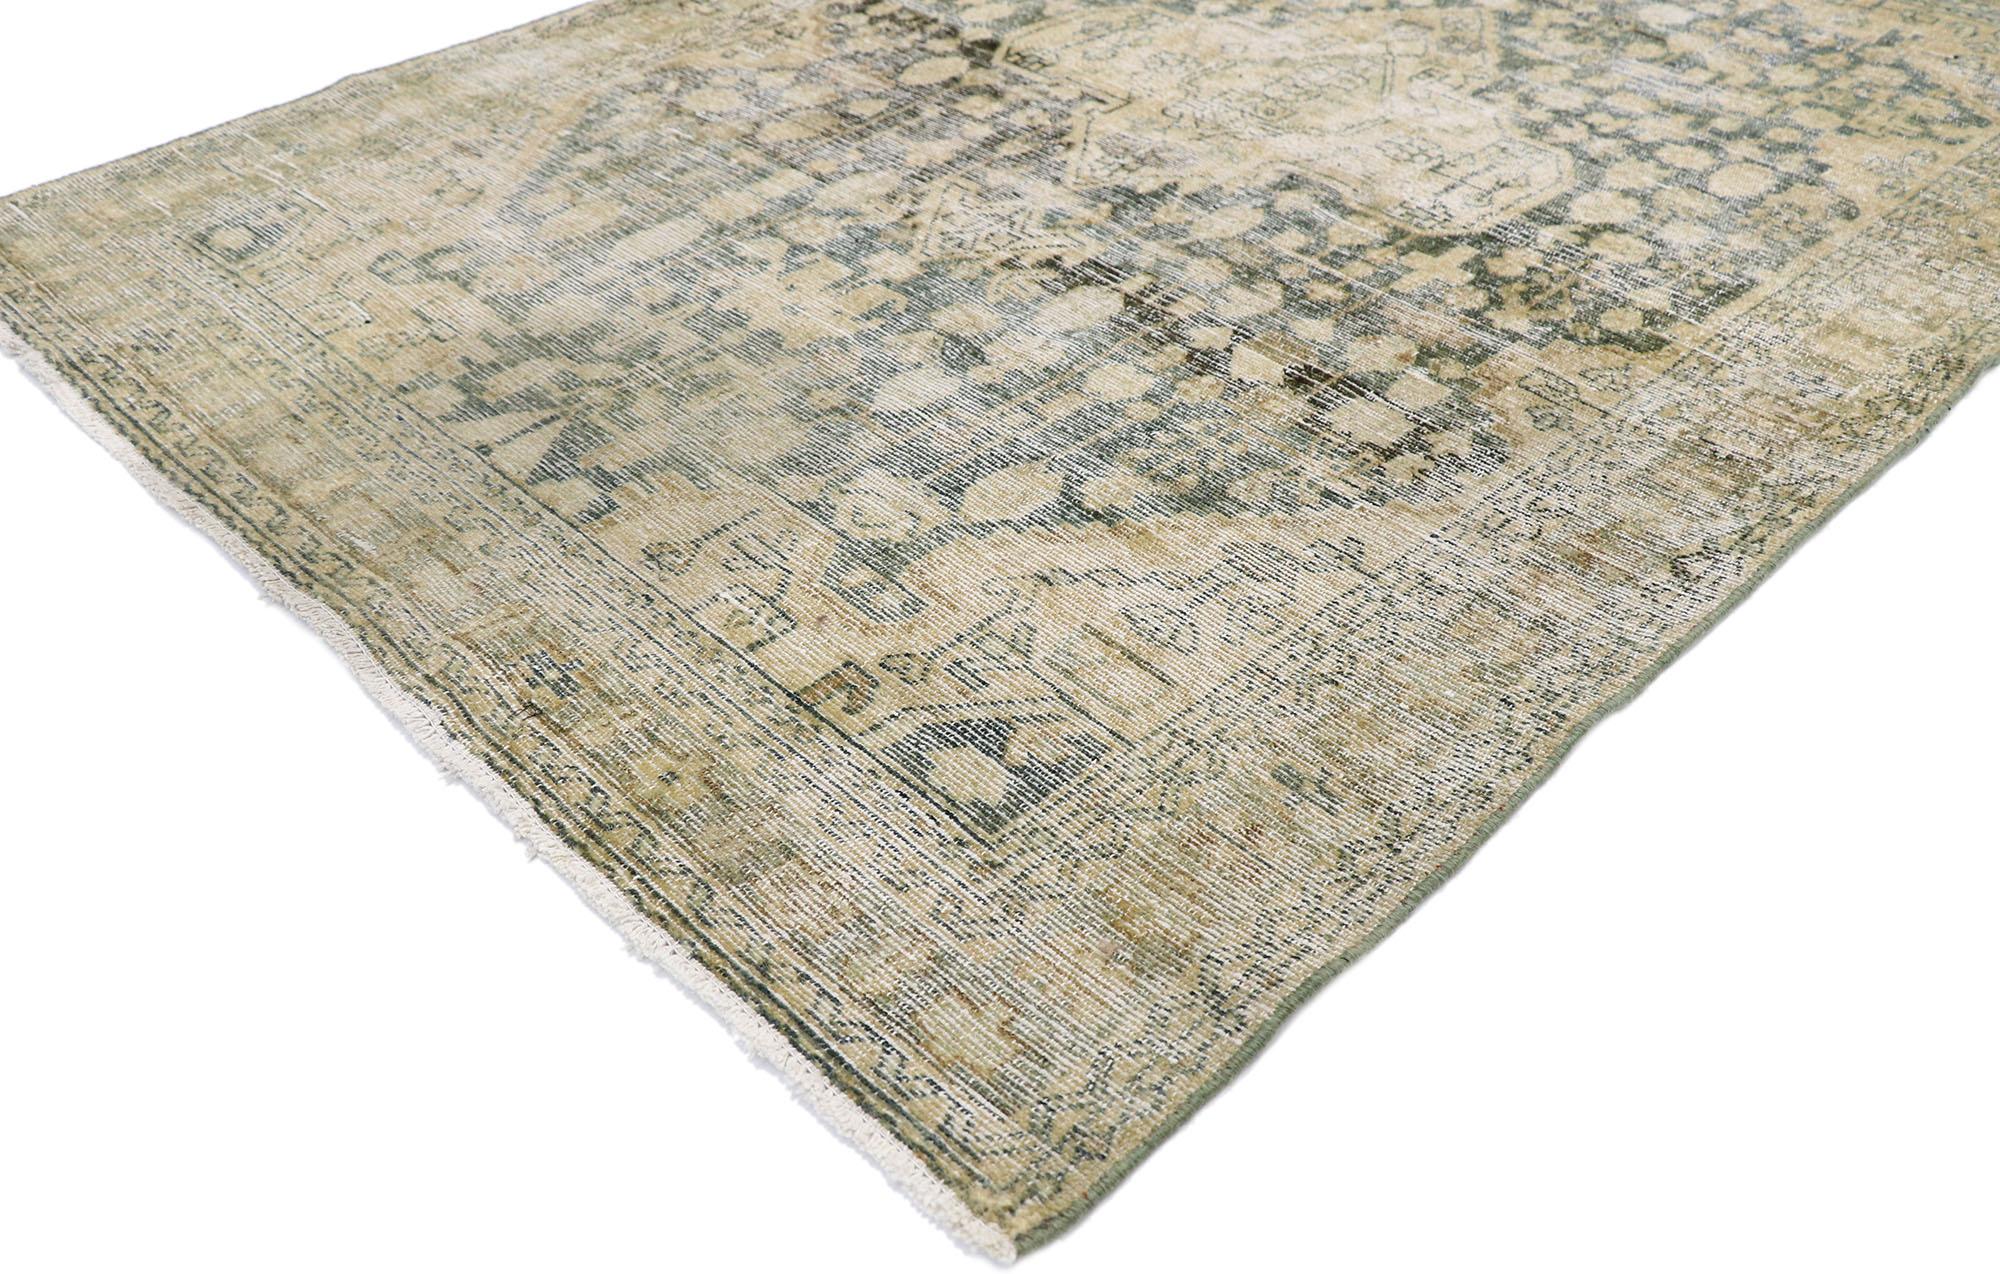 60838 Distressed antique Persian Mahal rug with Rustic Gustavian style. Softer yet no less striking, this hand knotted wool antique Persian Mahal rug beautifully embodies Gustavian style and Swedish simplicity. The weathered field features a